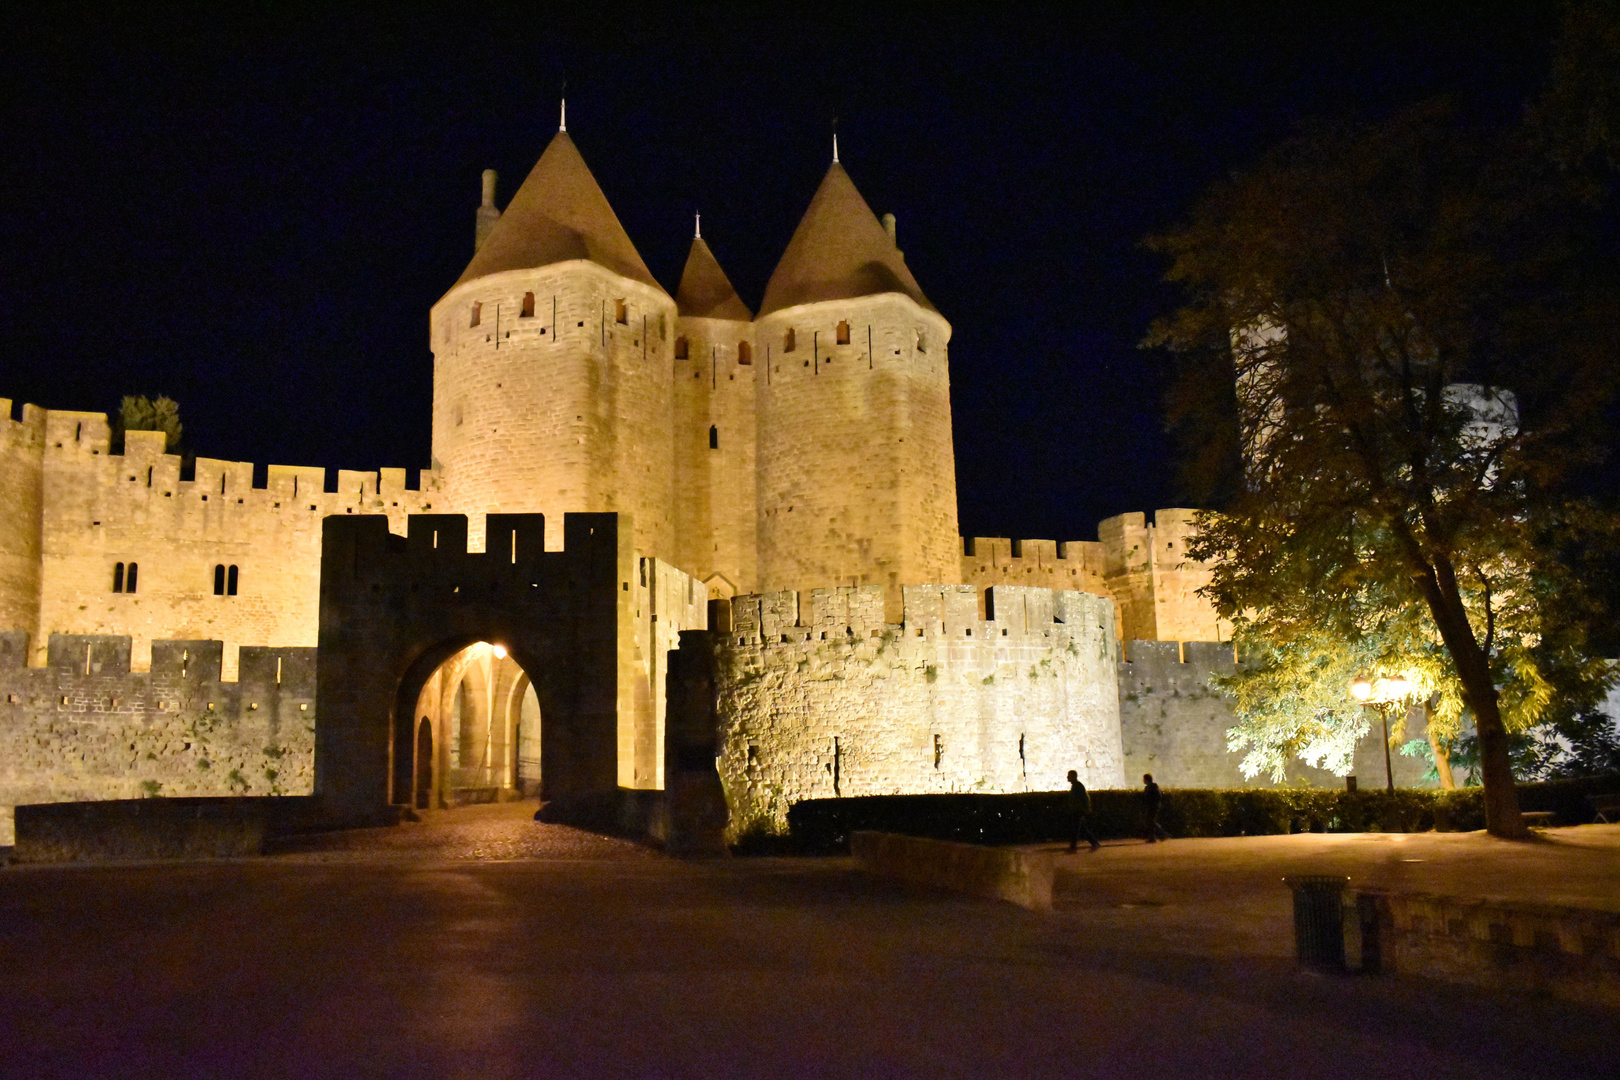 Carcassonne by Night